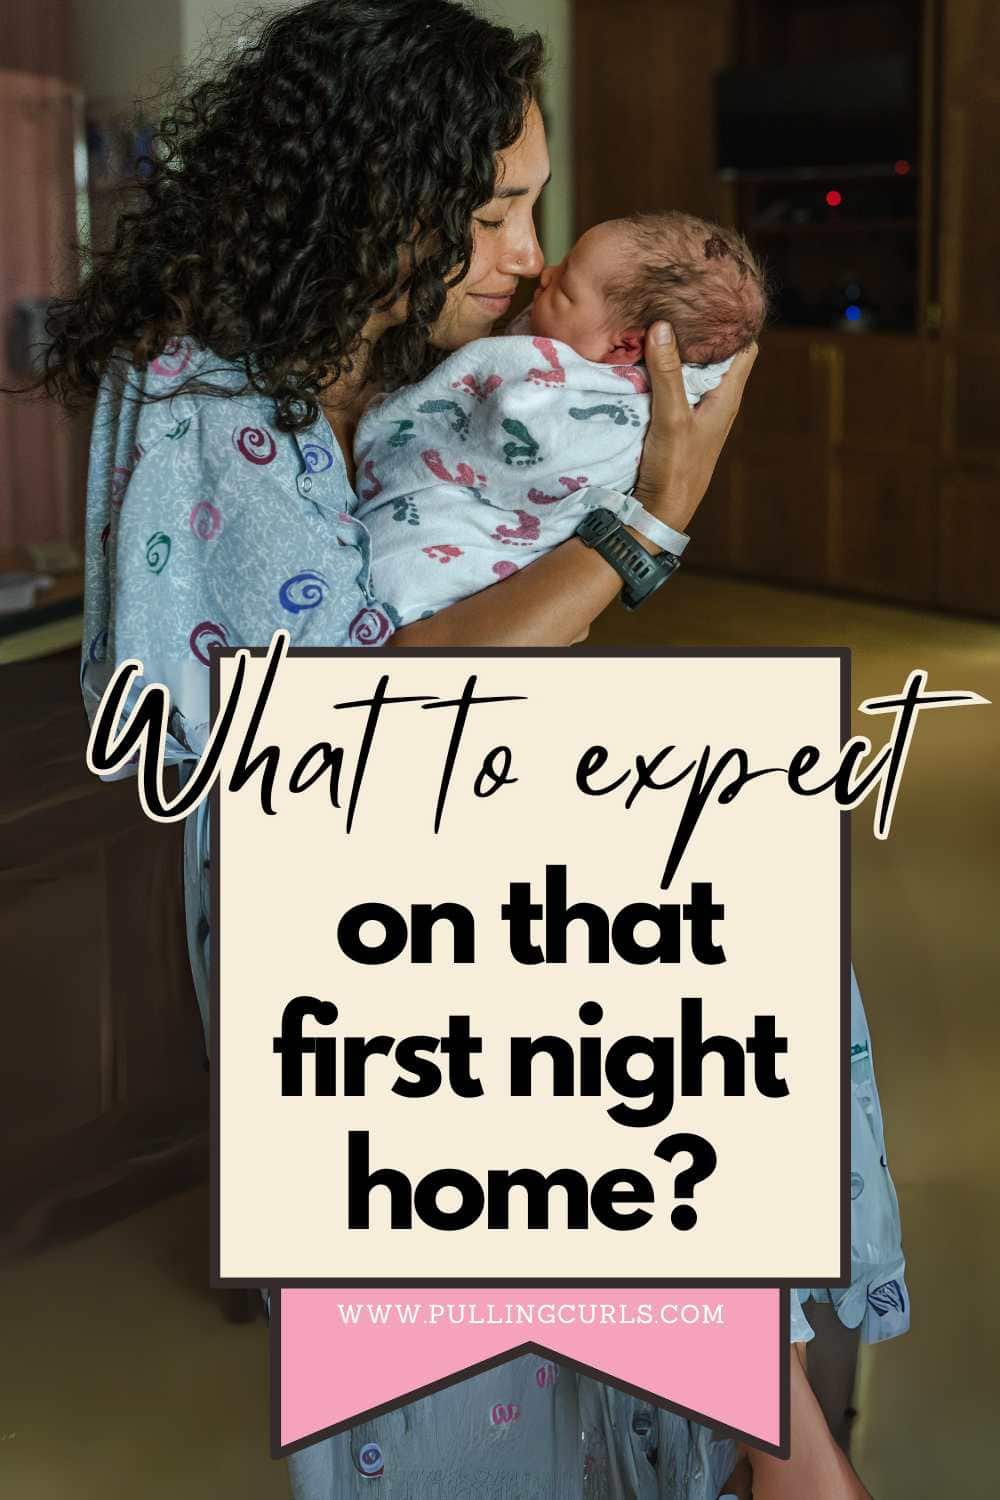 mom and newborn at the hospital / what to expect on that first night home via @pullingcurls